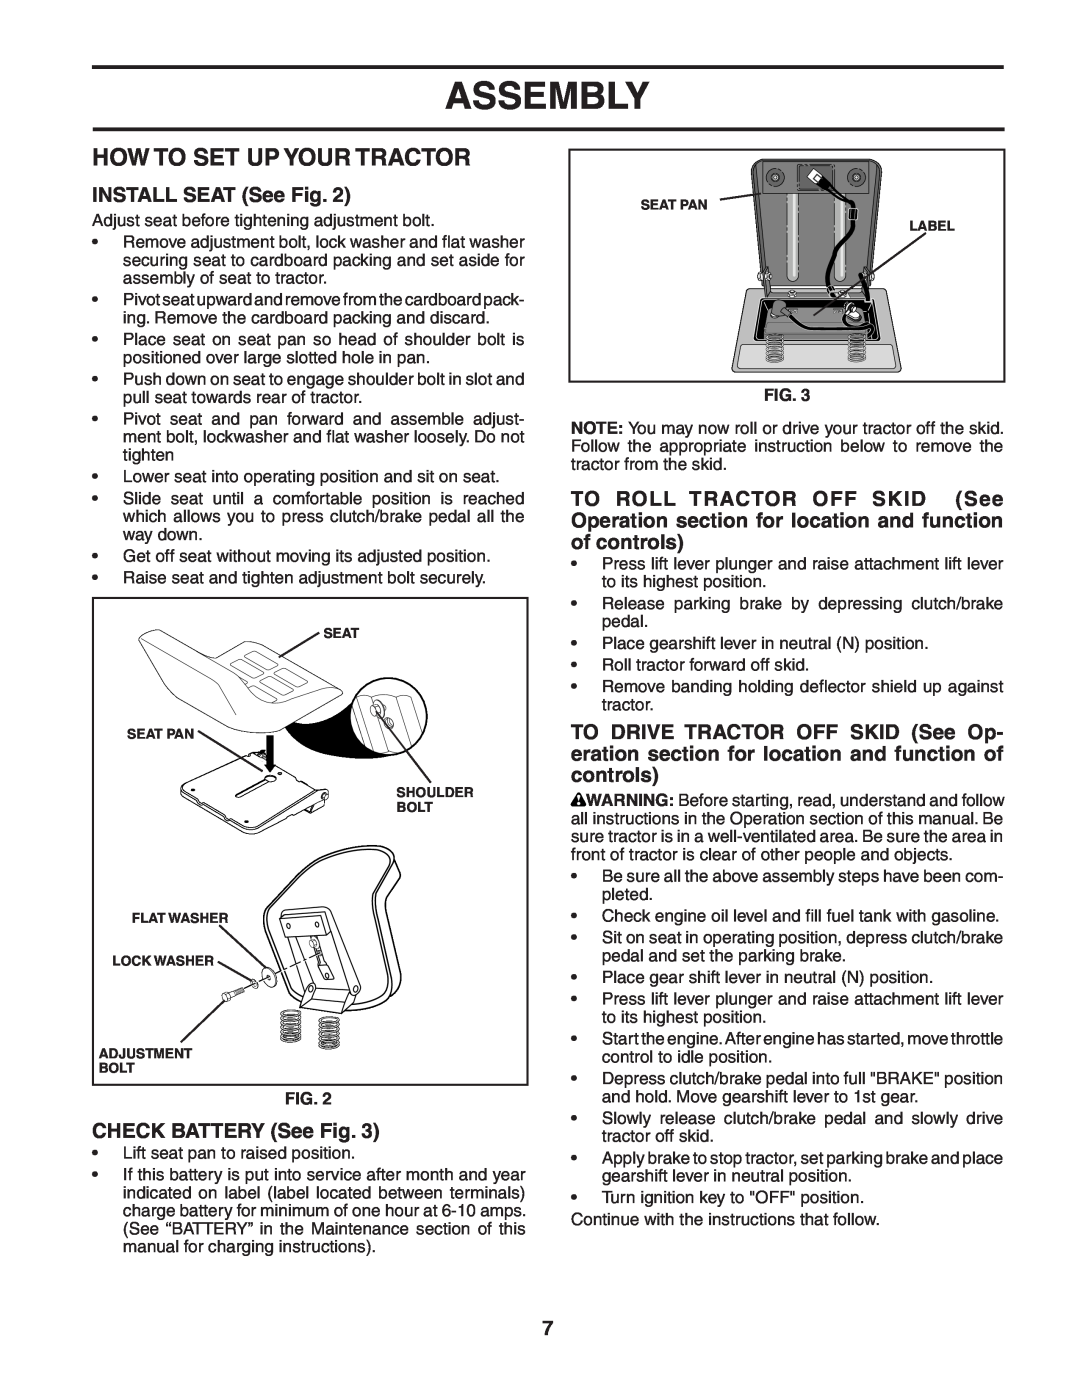 Poulan PO1538C manual How To Set Up Your Tractor, INSTALL SEAT See Fig, CHECK BATTERY See Fig, Assembly 